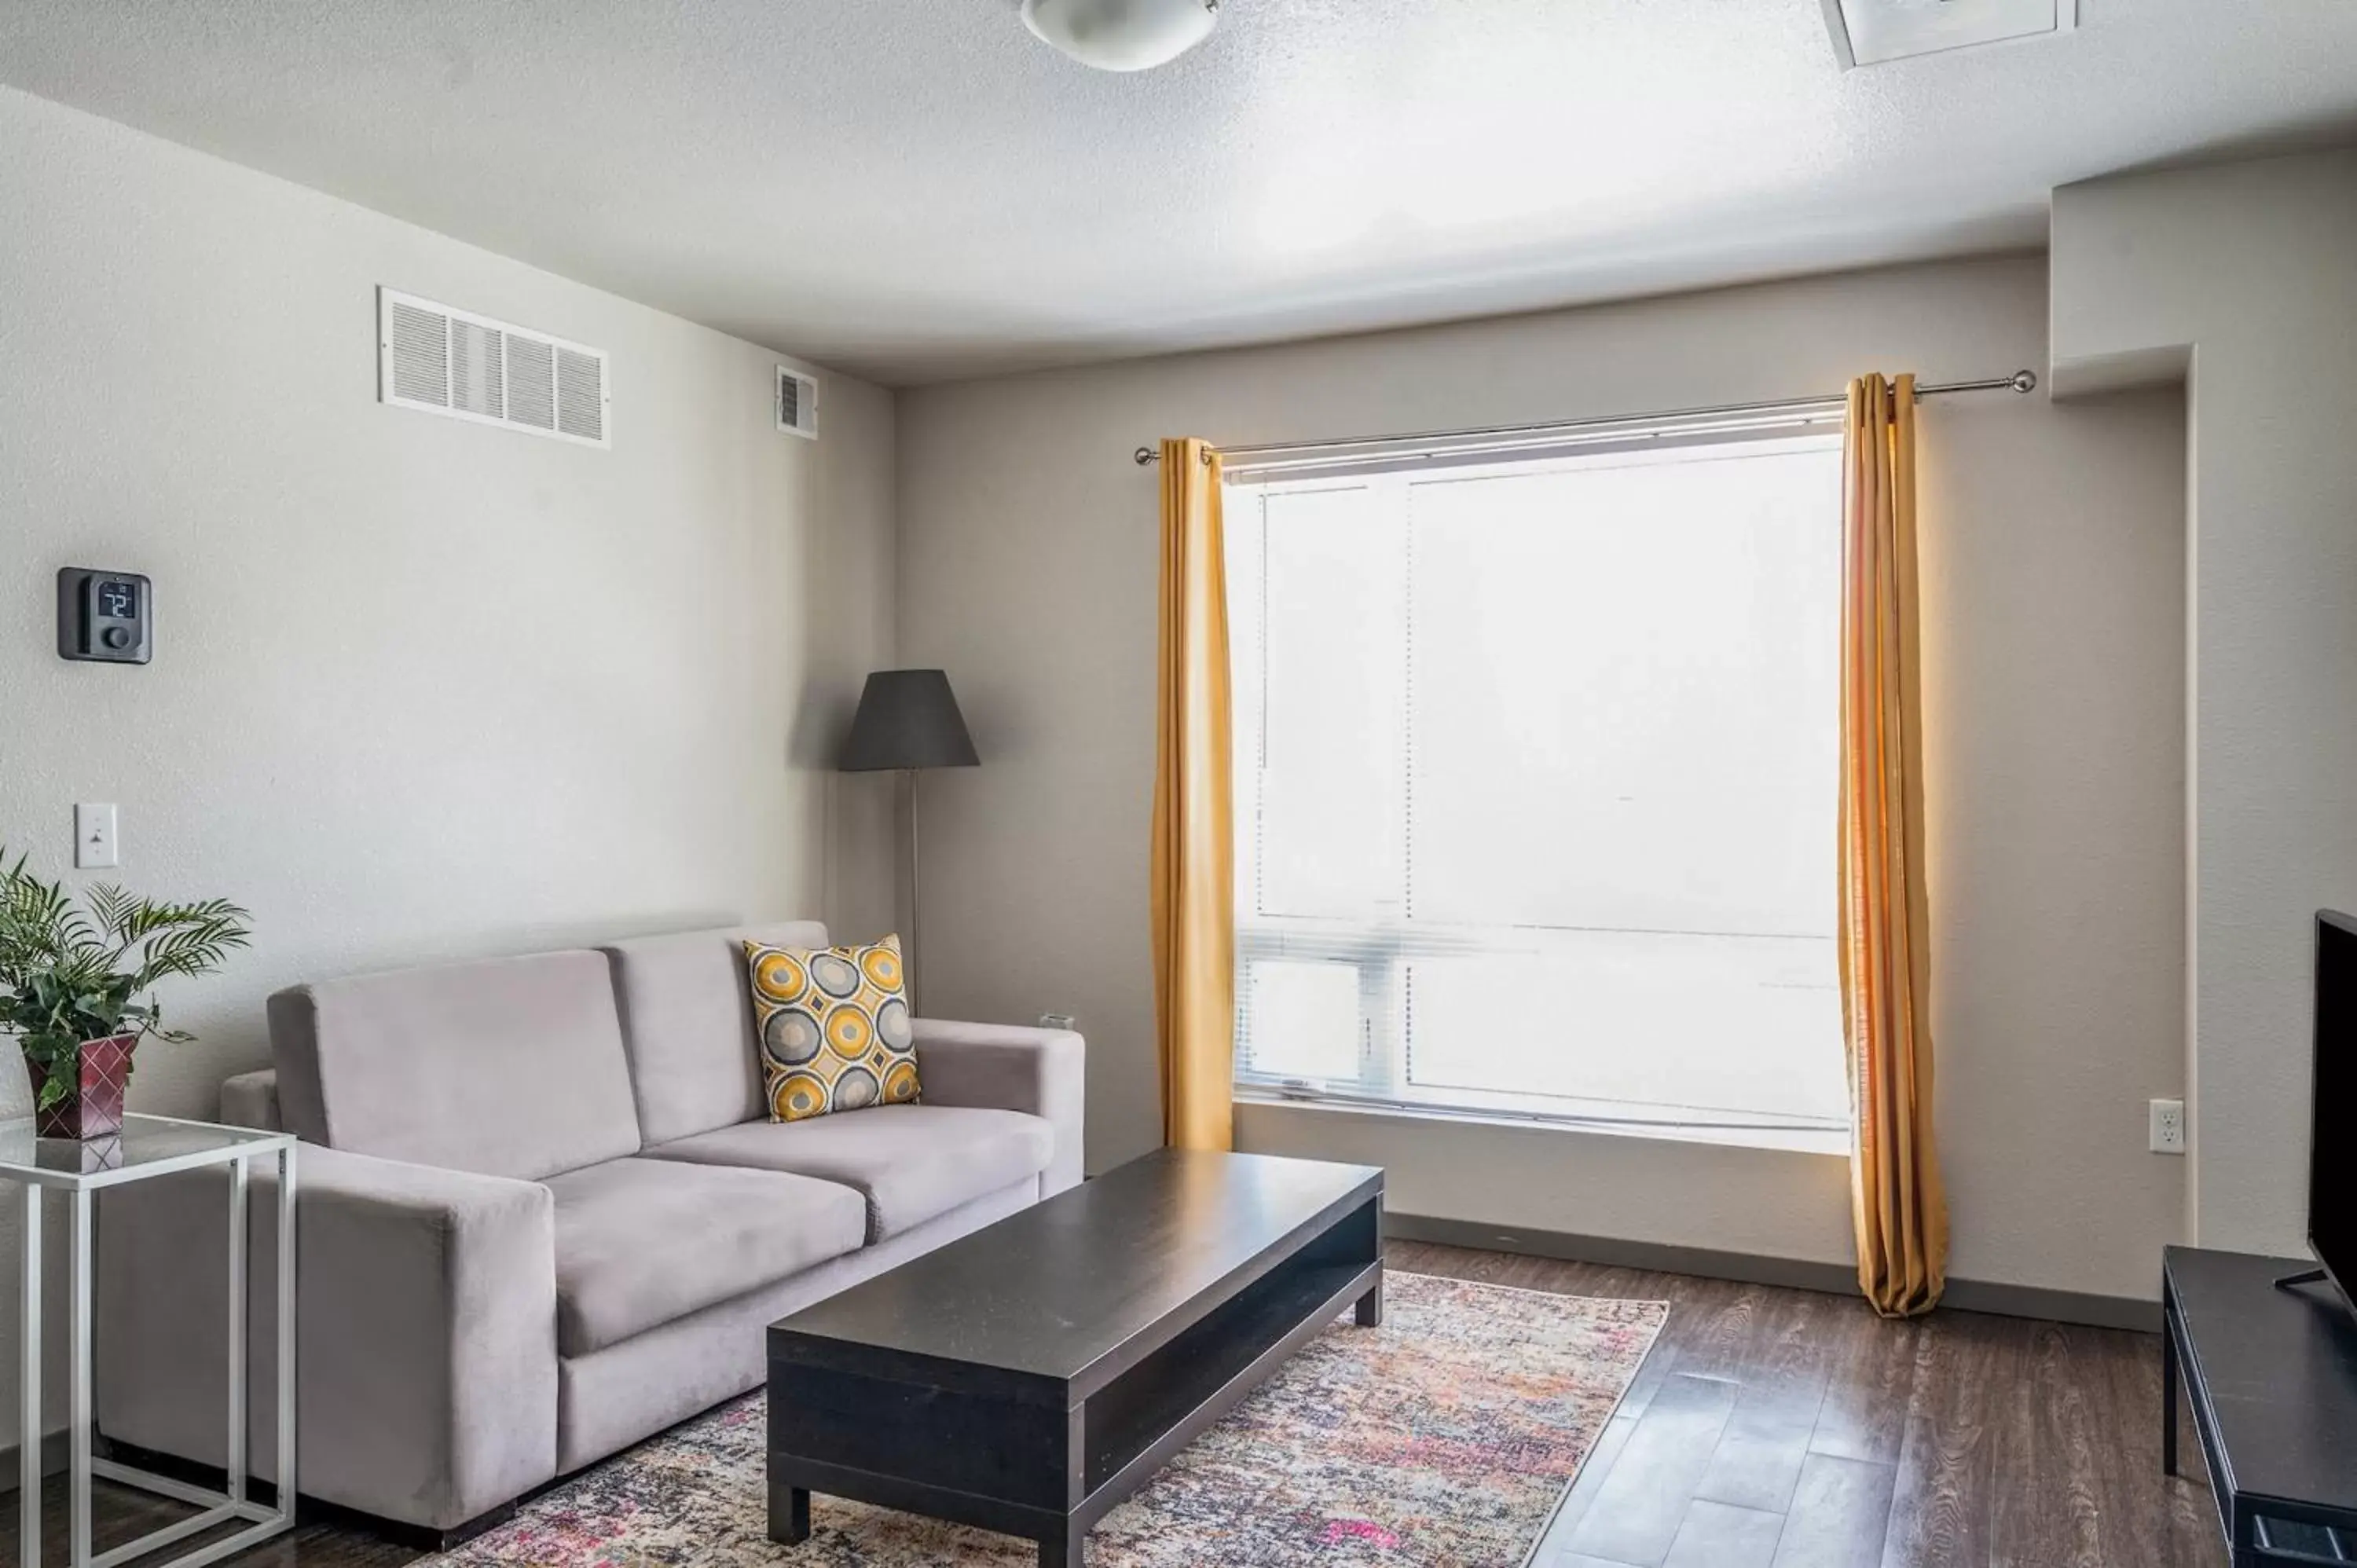 Two-Bedroom Apartment (Self Check-in with Virtual Front Desk) in Kasa University Avenue Minneapolis